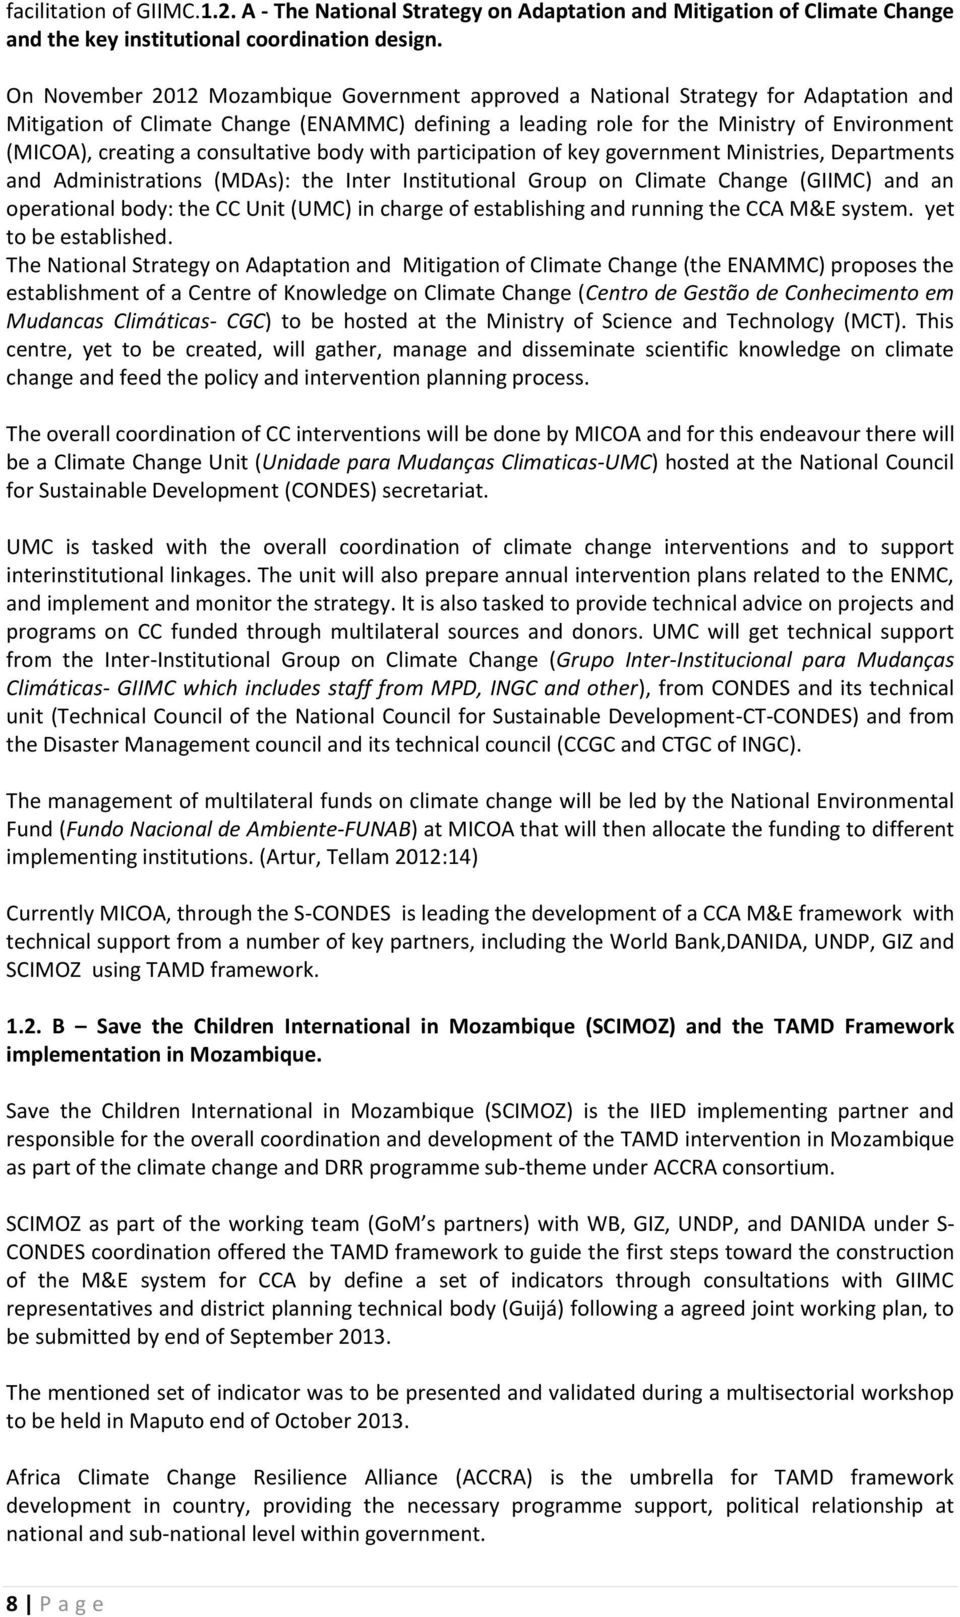 a consultative body with participation of key government Ministries, Departments and Administrations (MDAs): the Inter Institutional Group on Climate Change (GIIMC) and an operational body: the CC